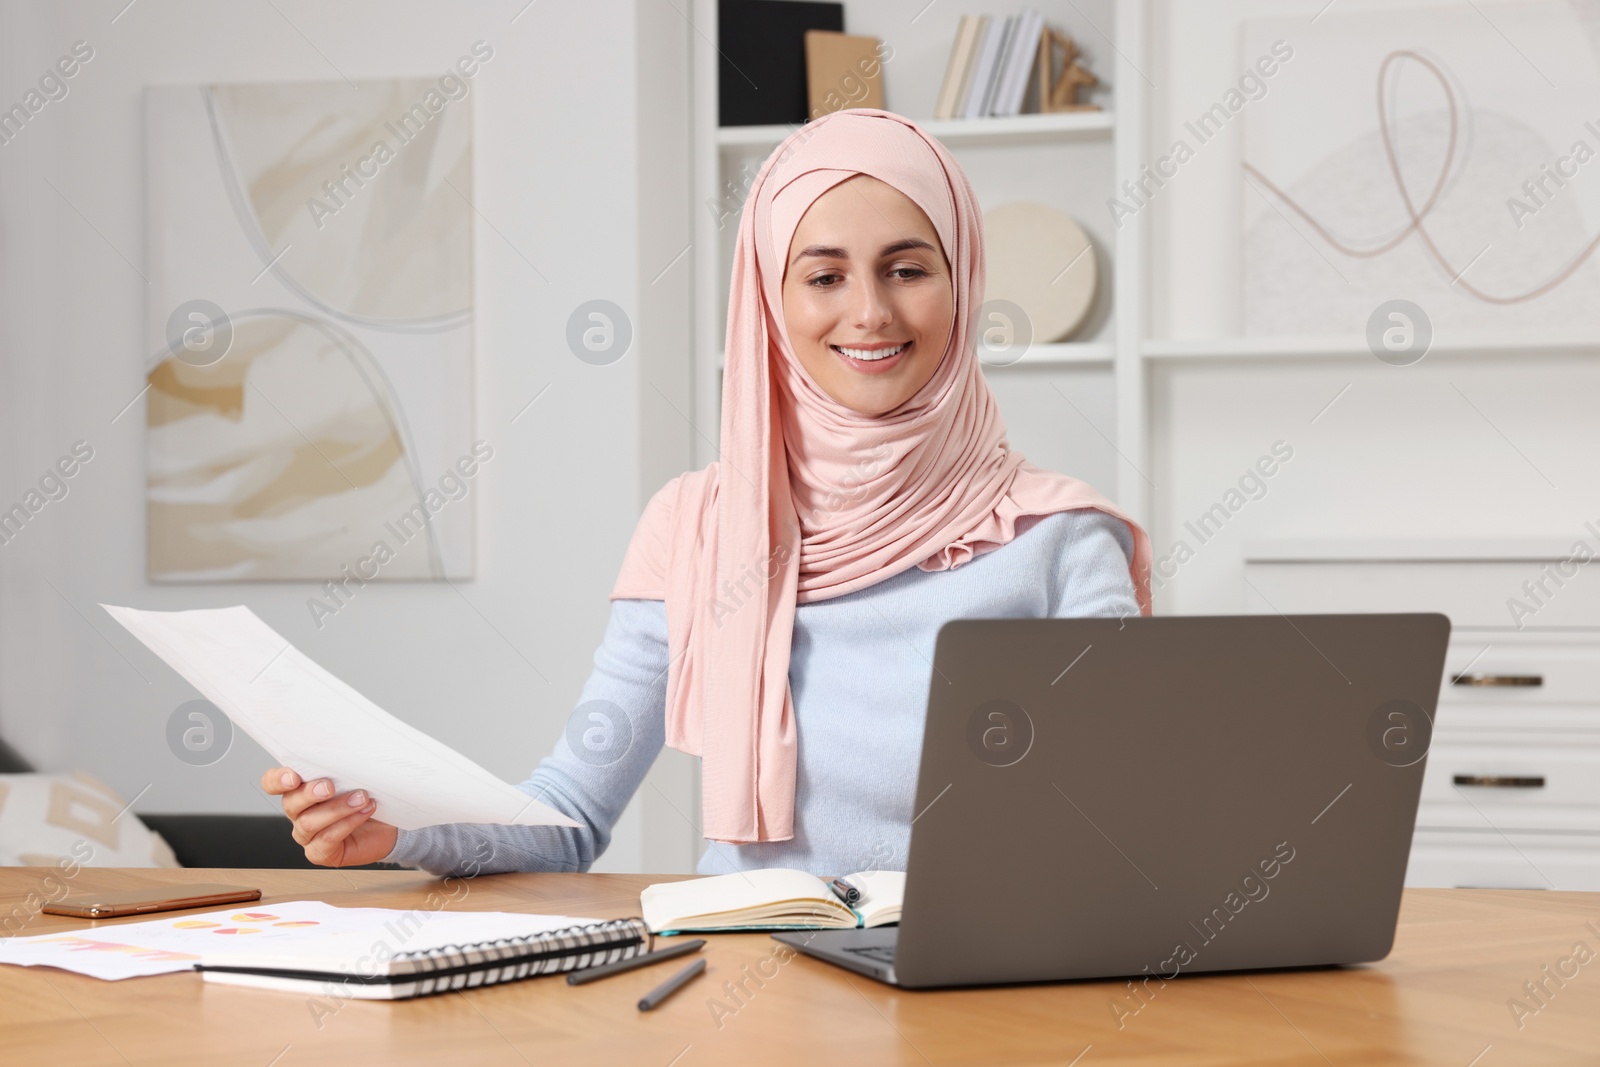 Photo of Muslim woman working near laptop at wooden table in room